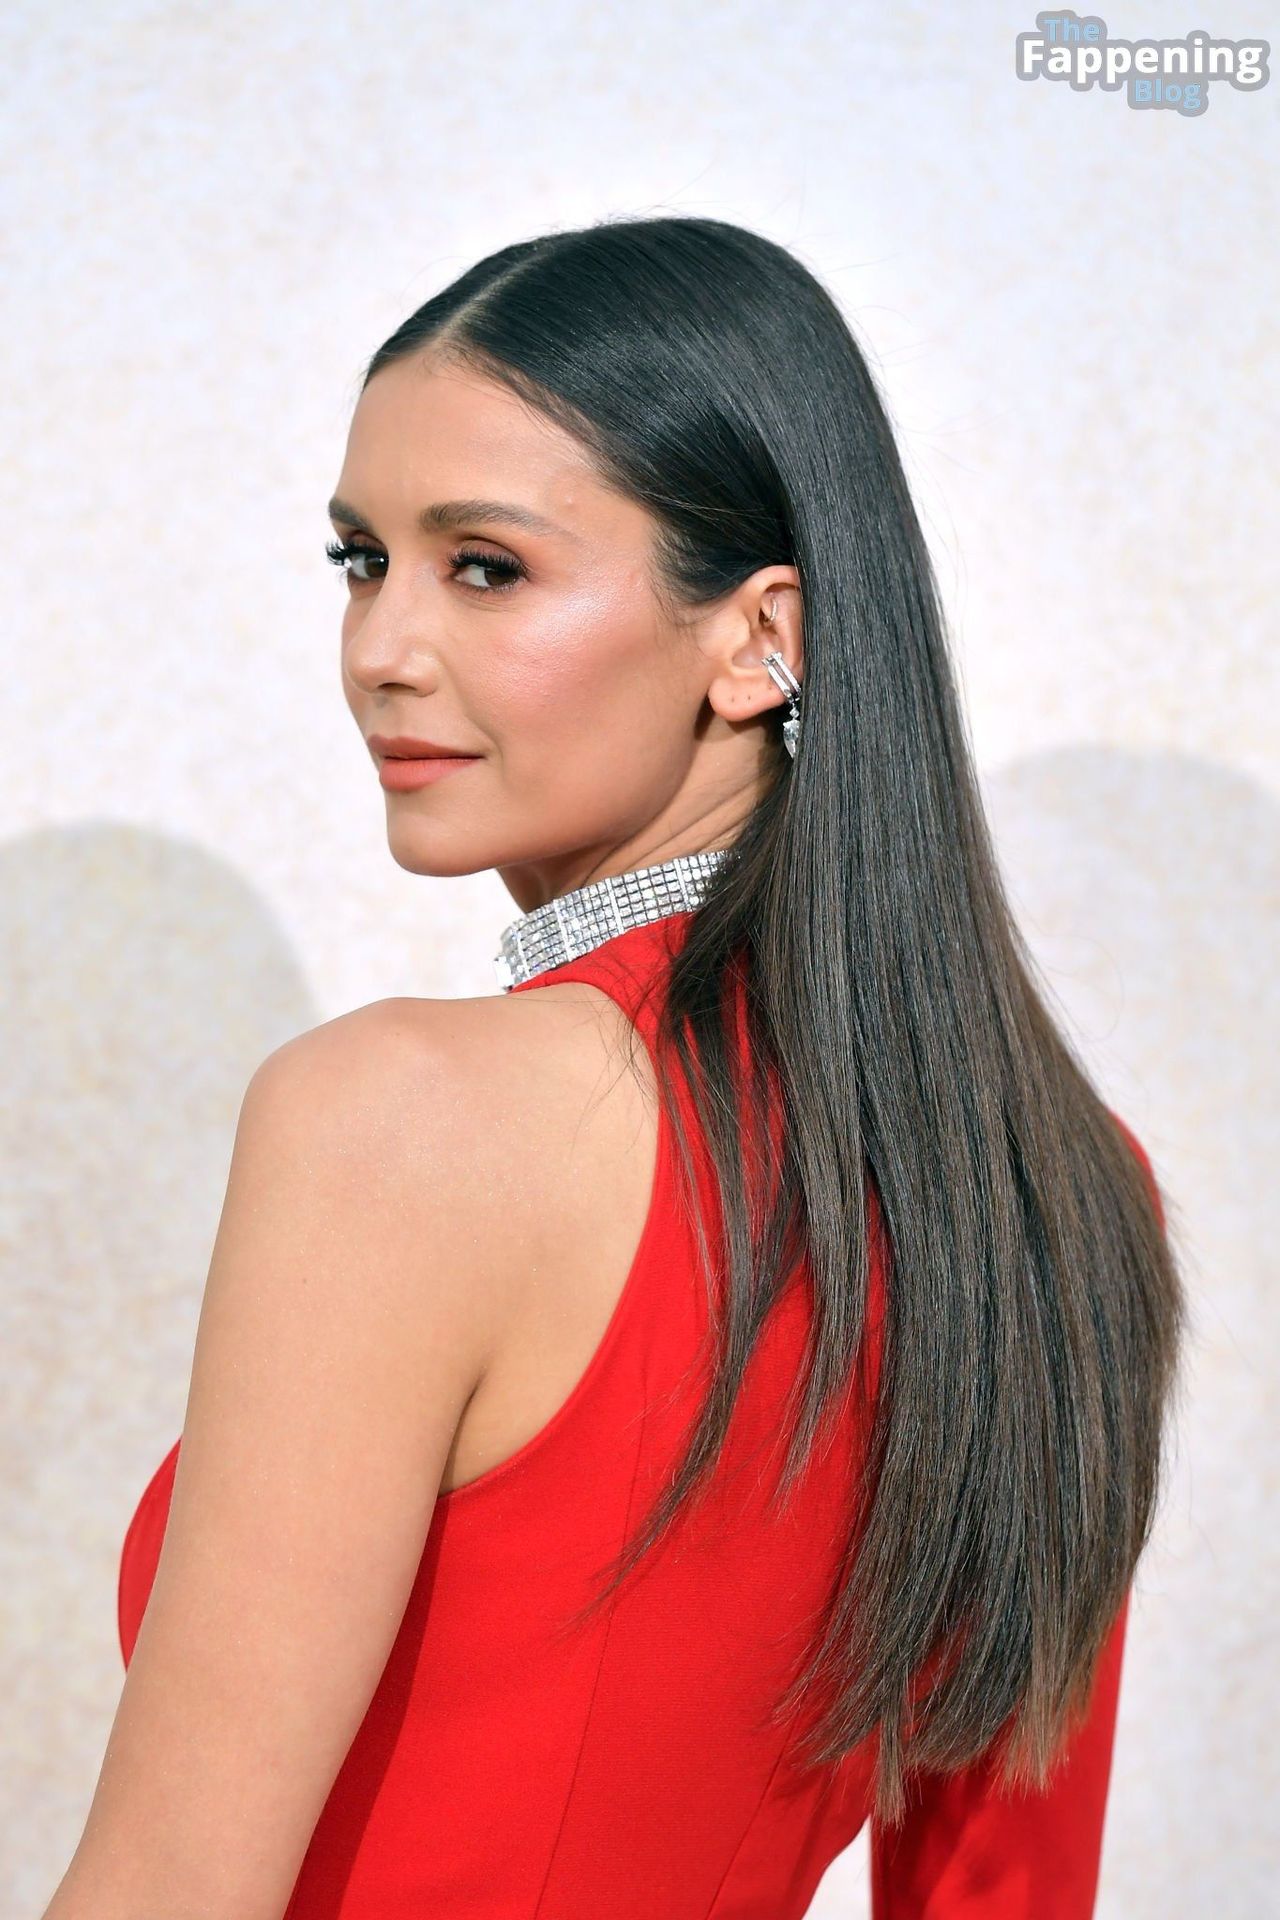 Nina Dobrev Shows Off Her Sexy Boobs In A Red Dress 64 New Photos